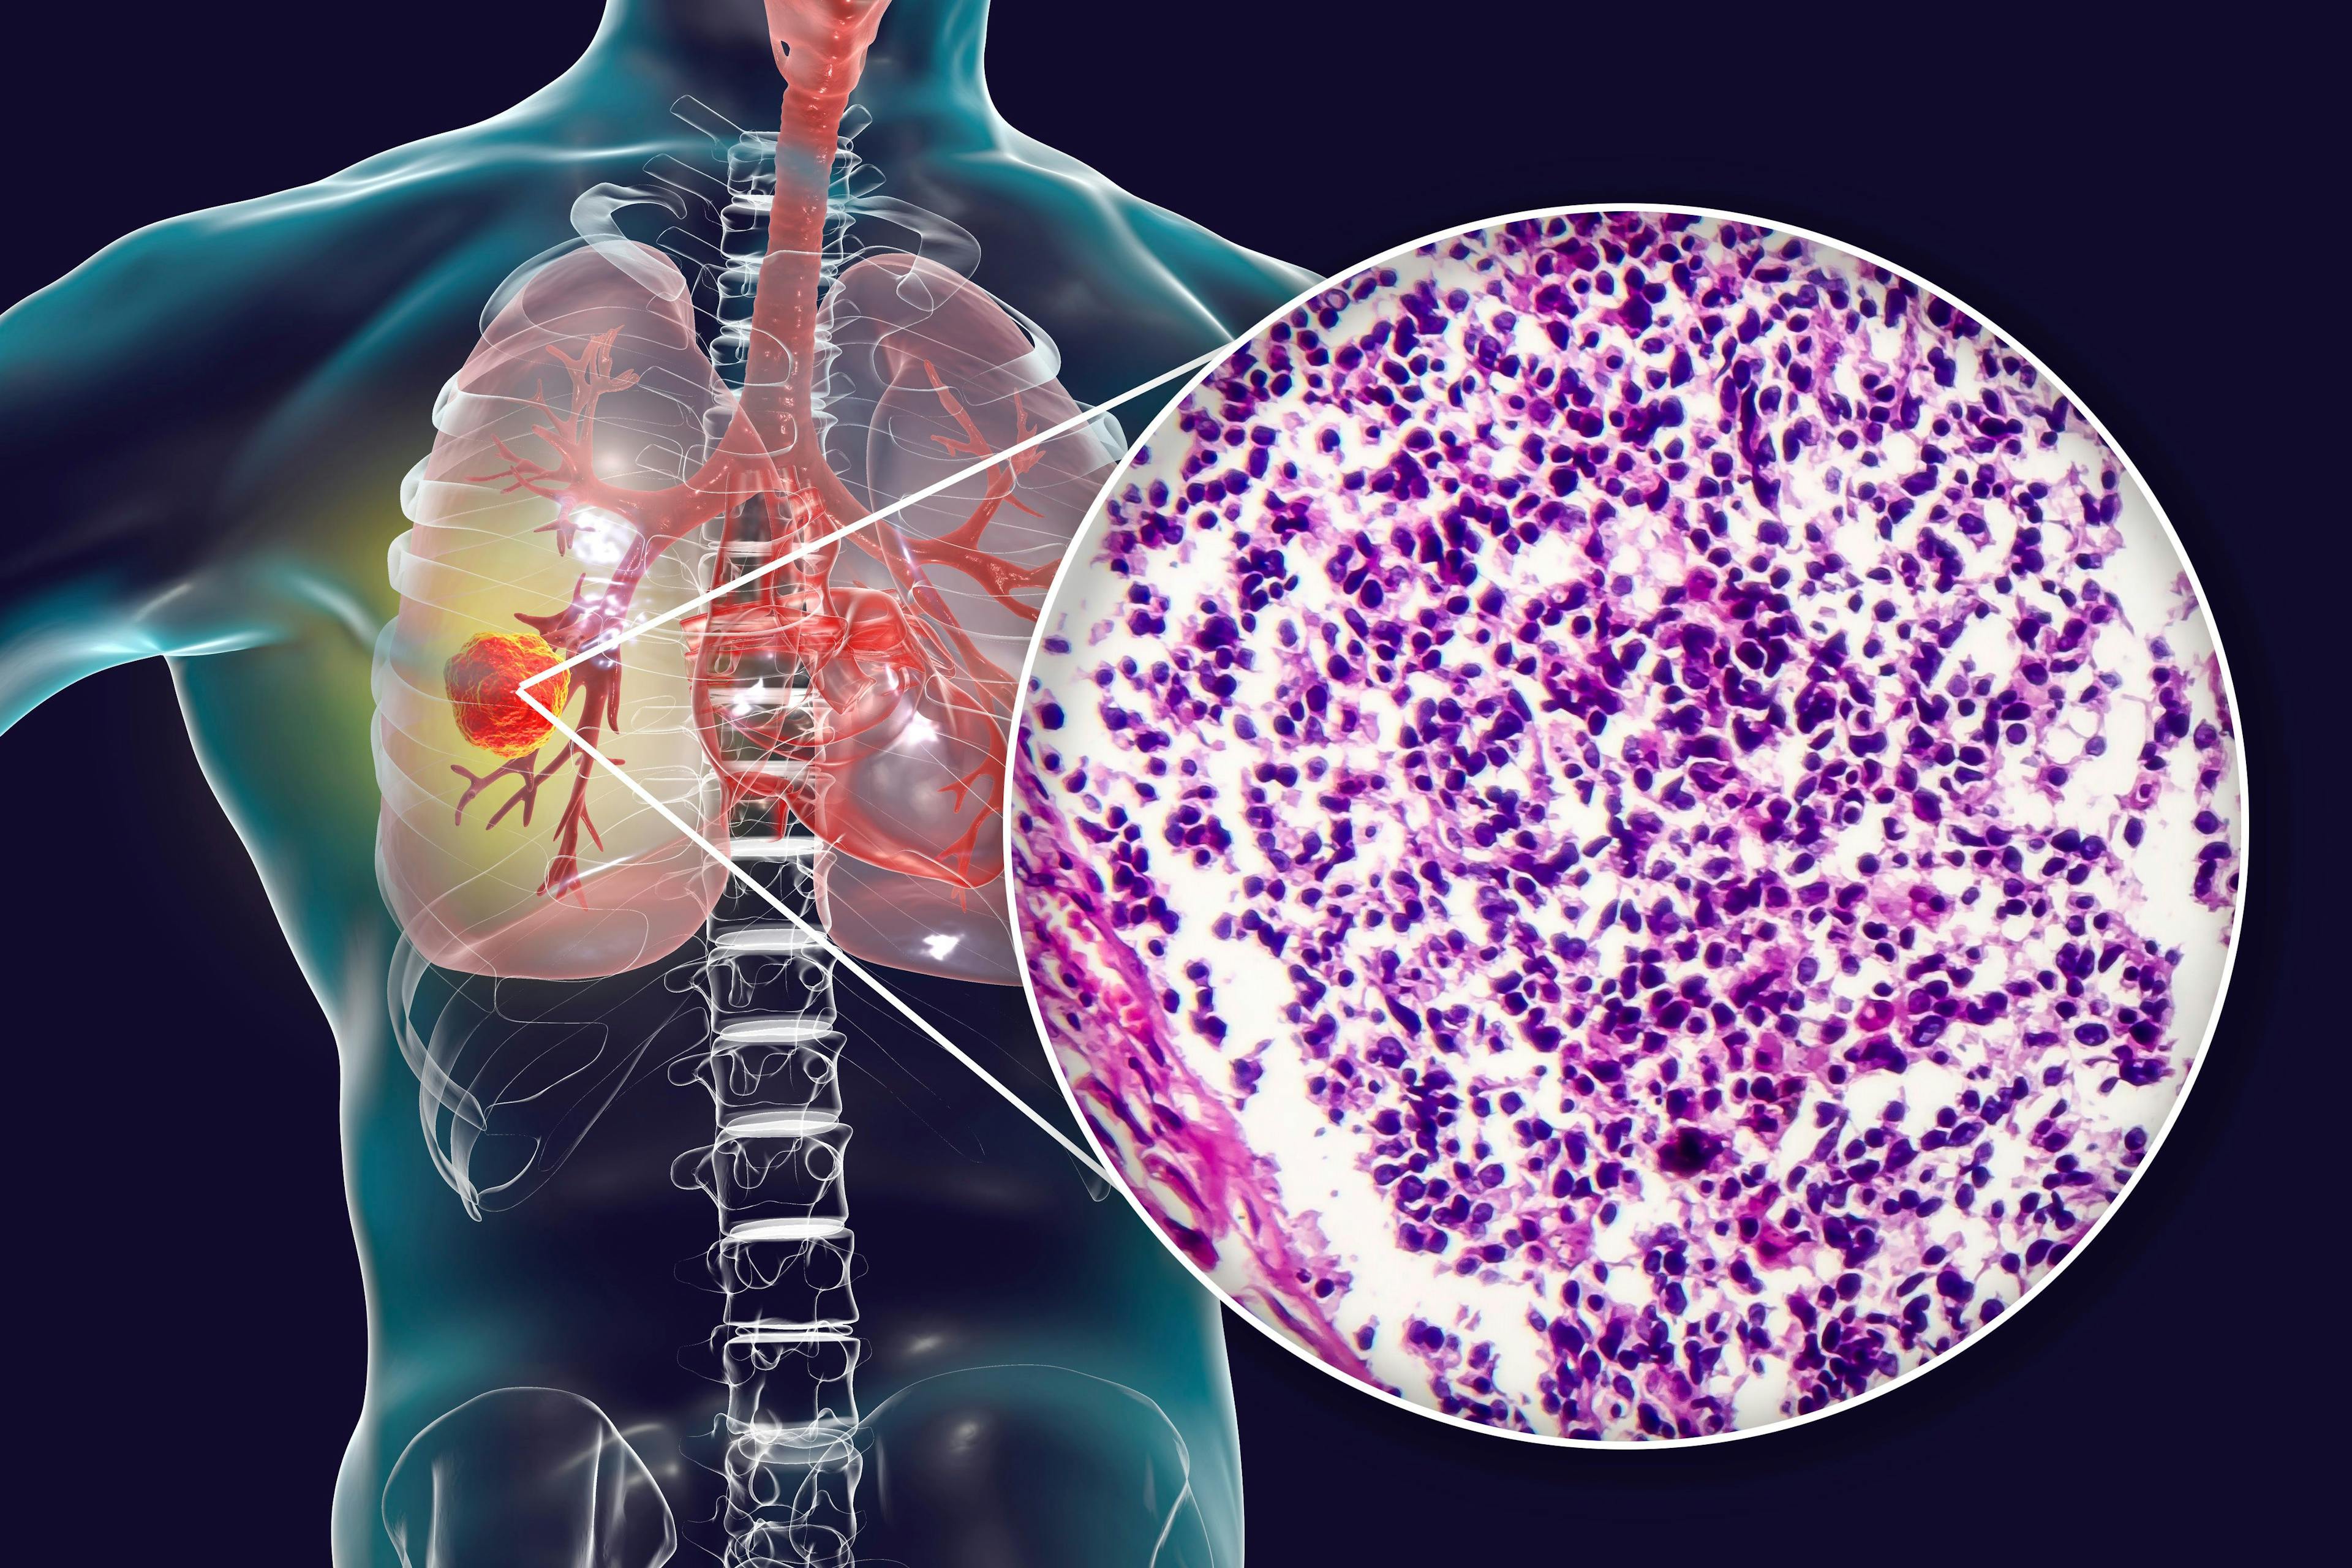 lung cancer | Image credit: Dr_Microbe - stock.adobe.com